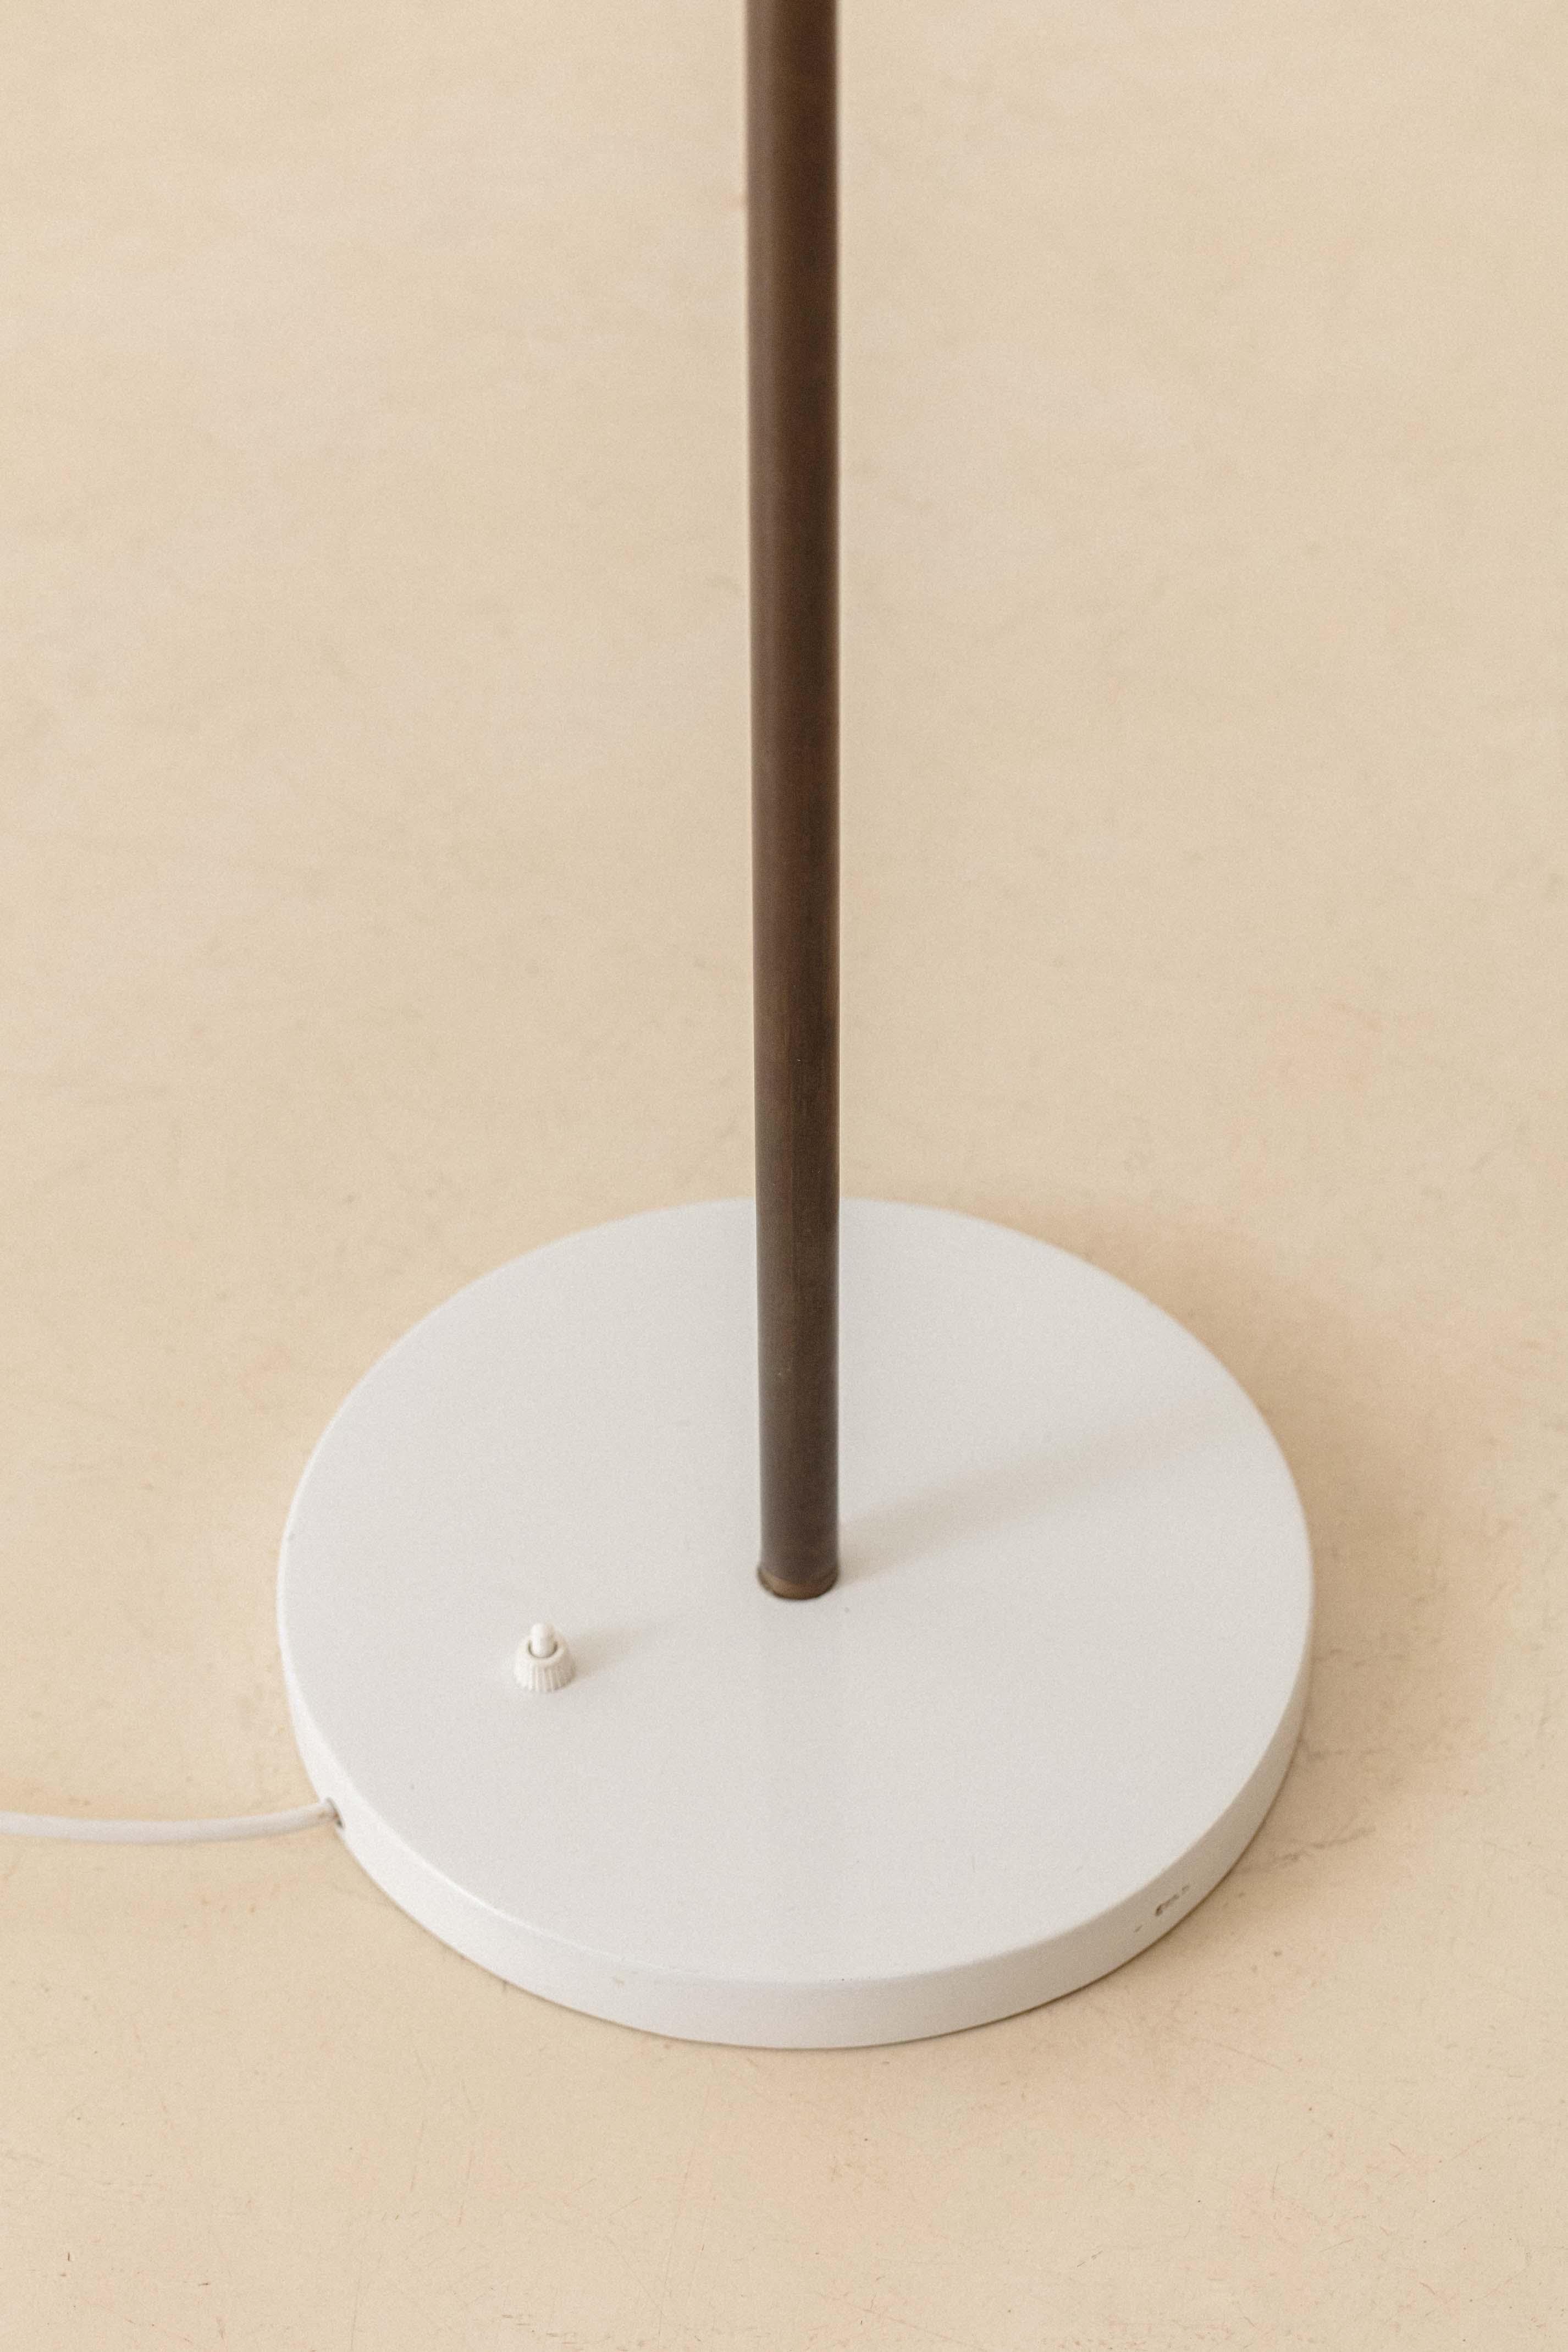 Floor Lamp, Design Attributed to Martin Eisler, Forma S.A., Brazil, 1950s For Sale 5